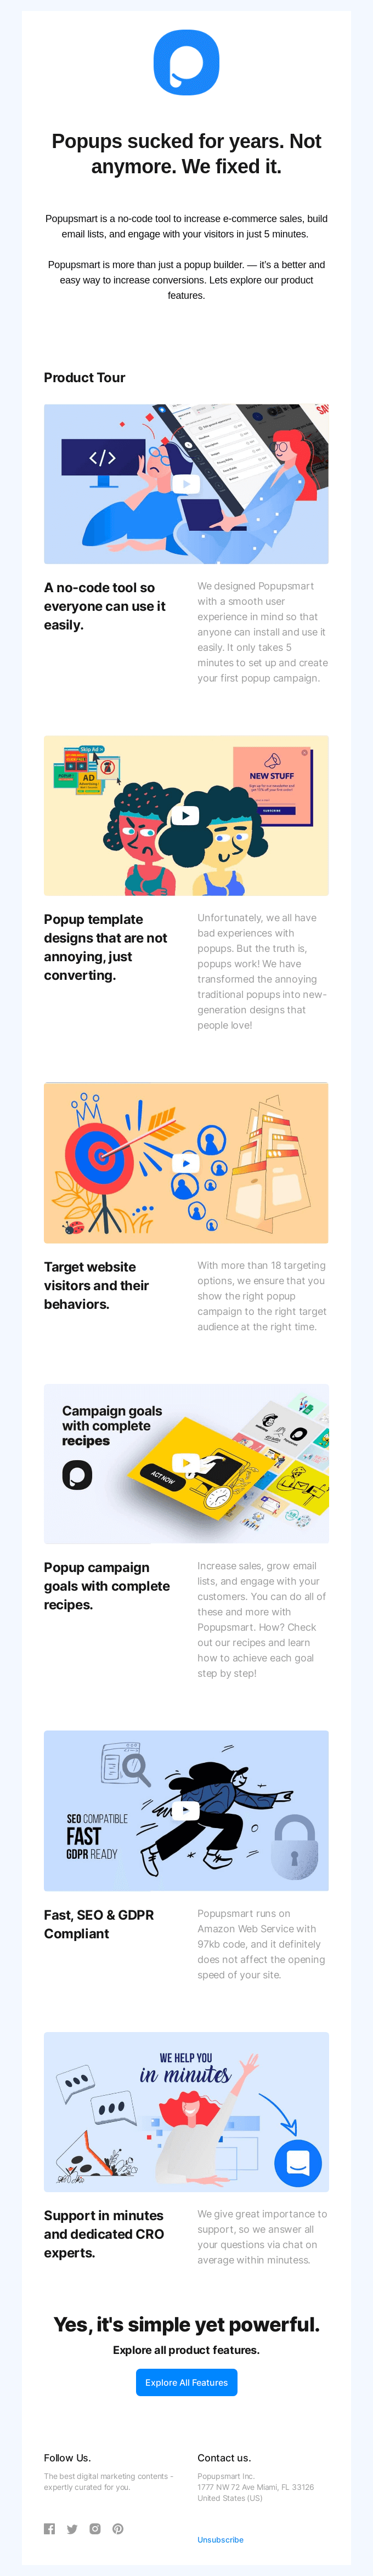 Popups sucked for years. We fixed it. Explore our product features.
- Popupsmart Email Newsletter